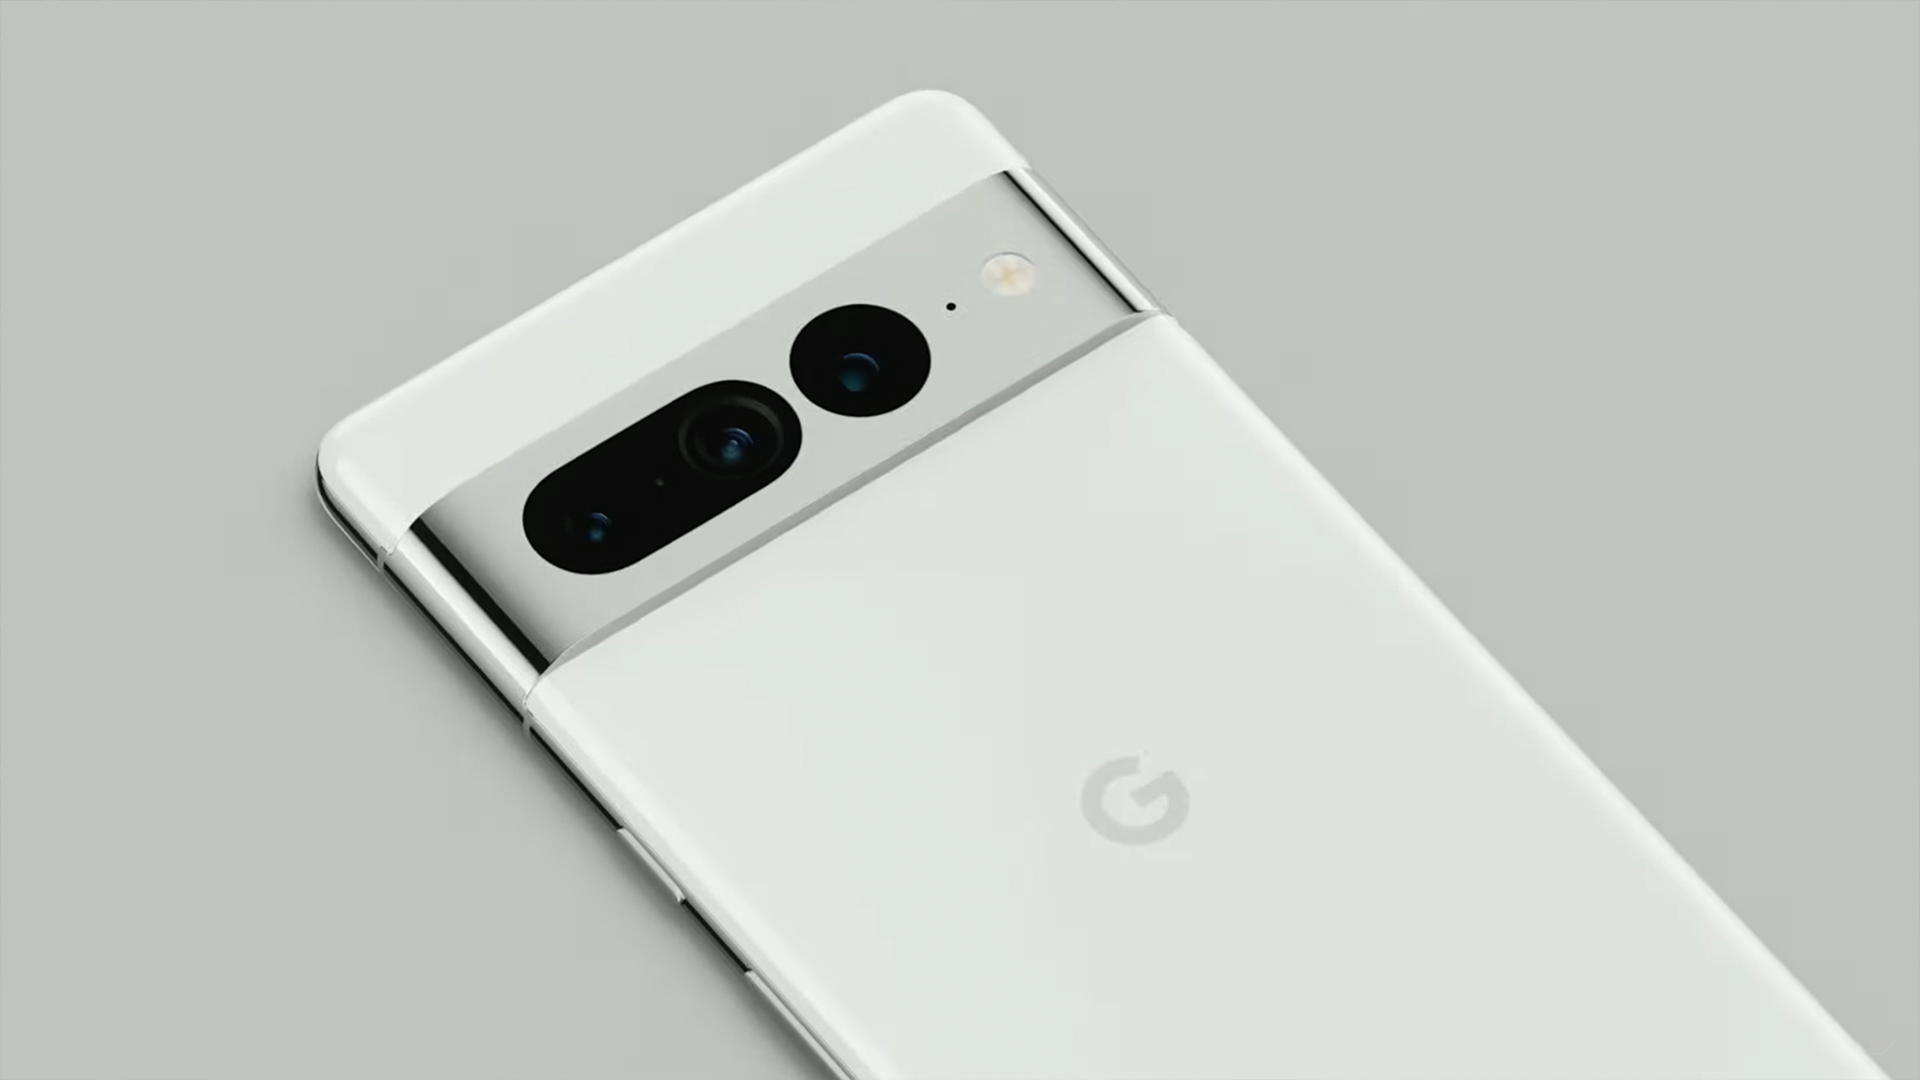 The Google Pixel 7 in white. Its camera bar features two large back lenses, one of which is oval shaped.